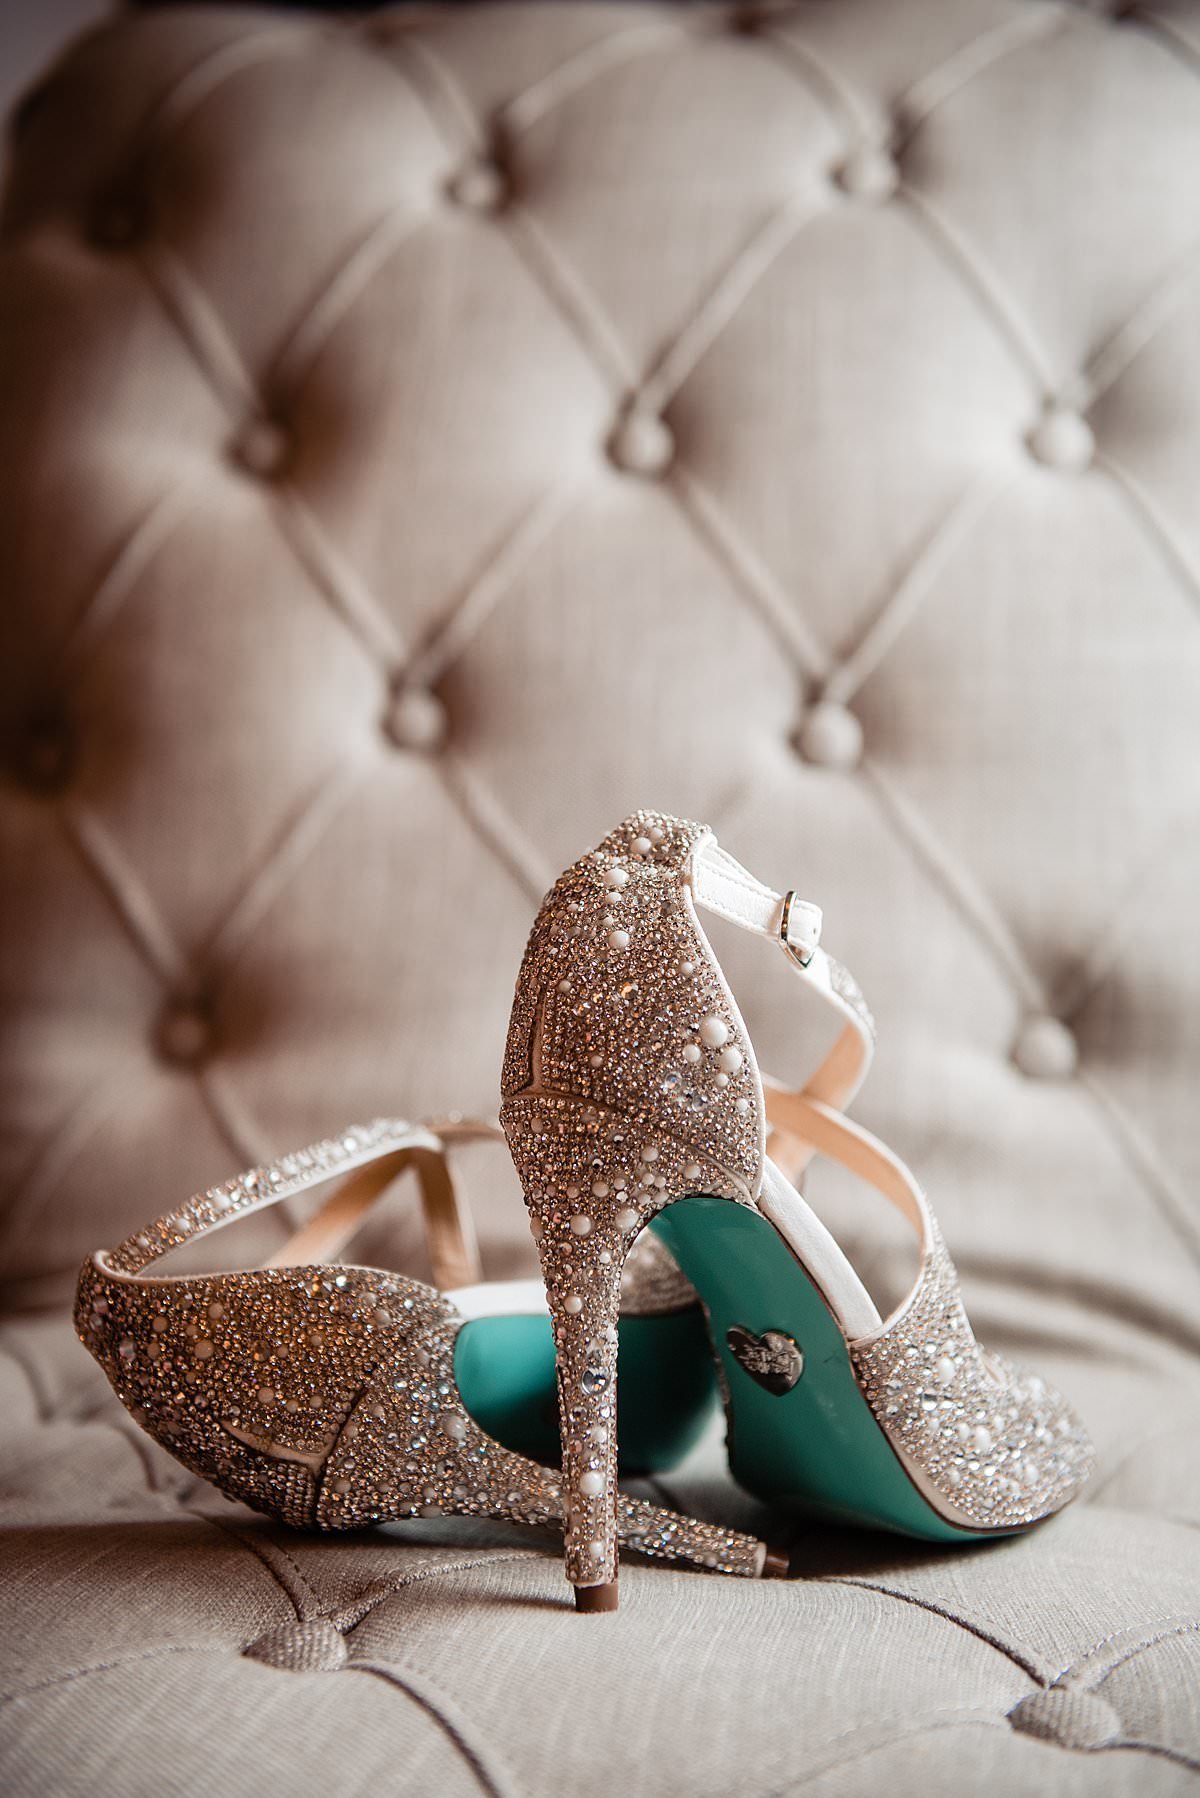 Bridal shoes with crystals and pearls covering the entire shoe